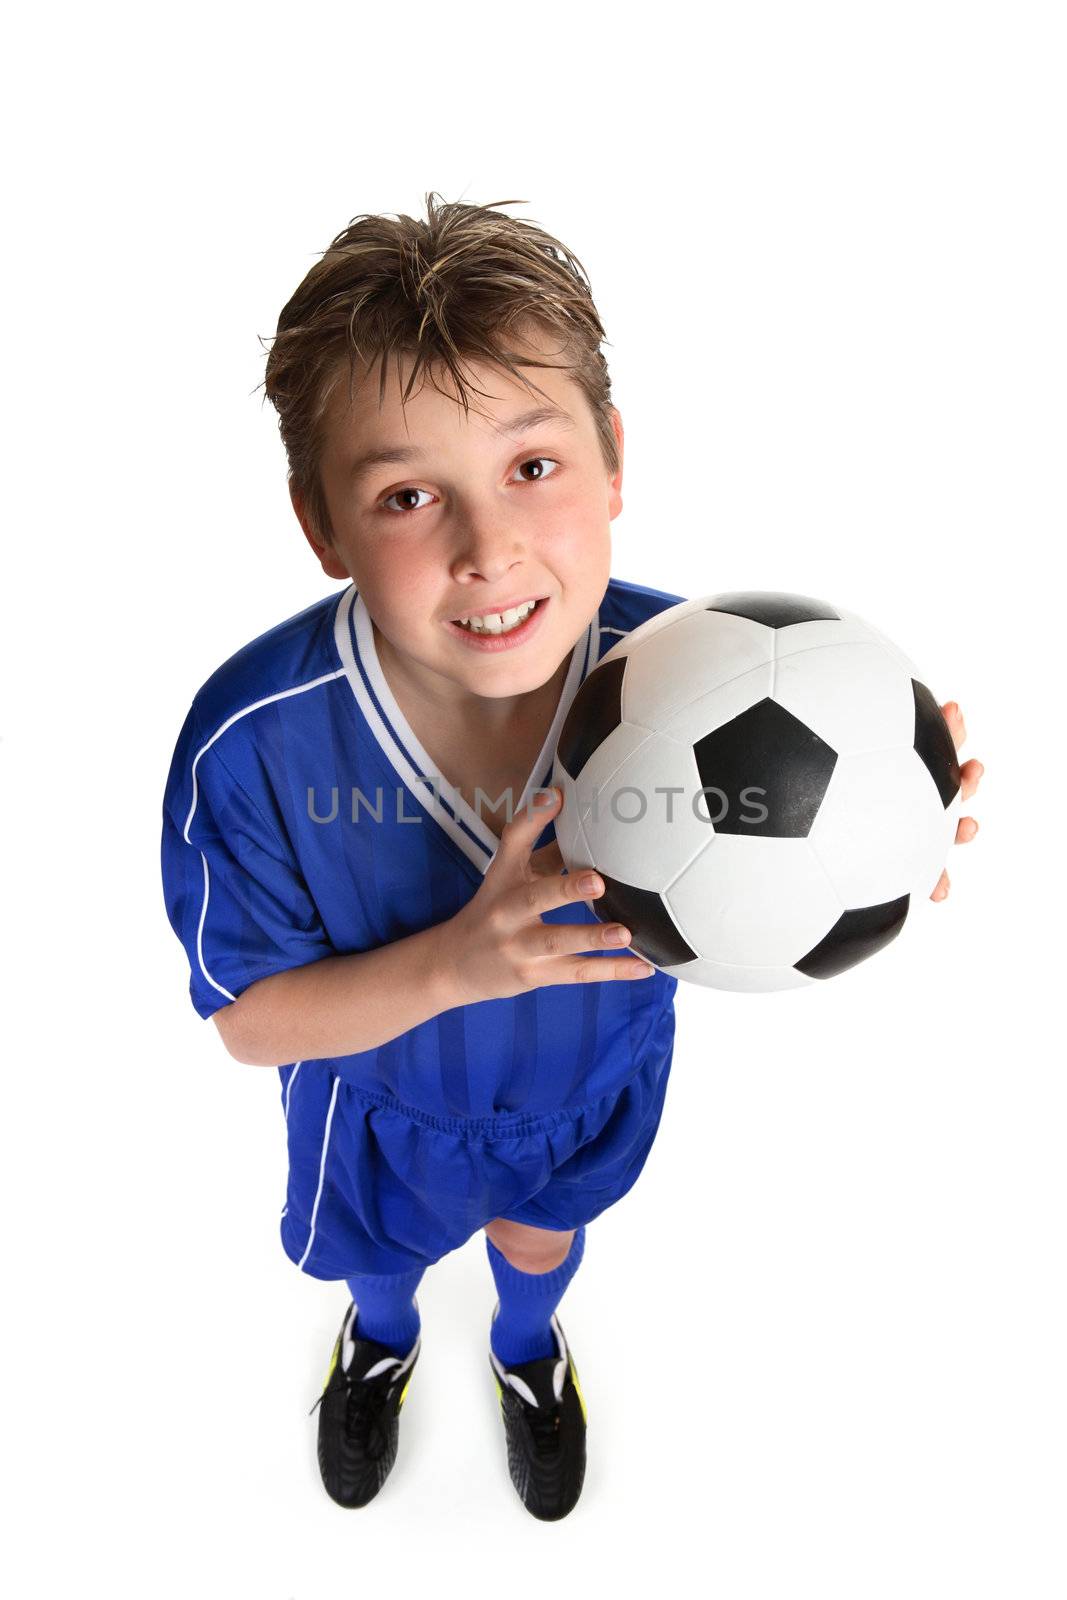 A boy ready for a game of soccer.